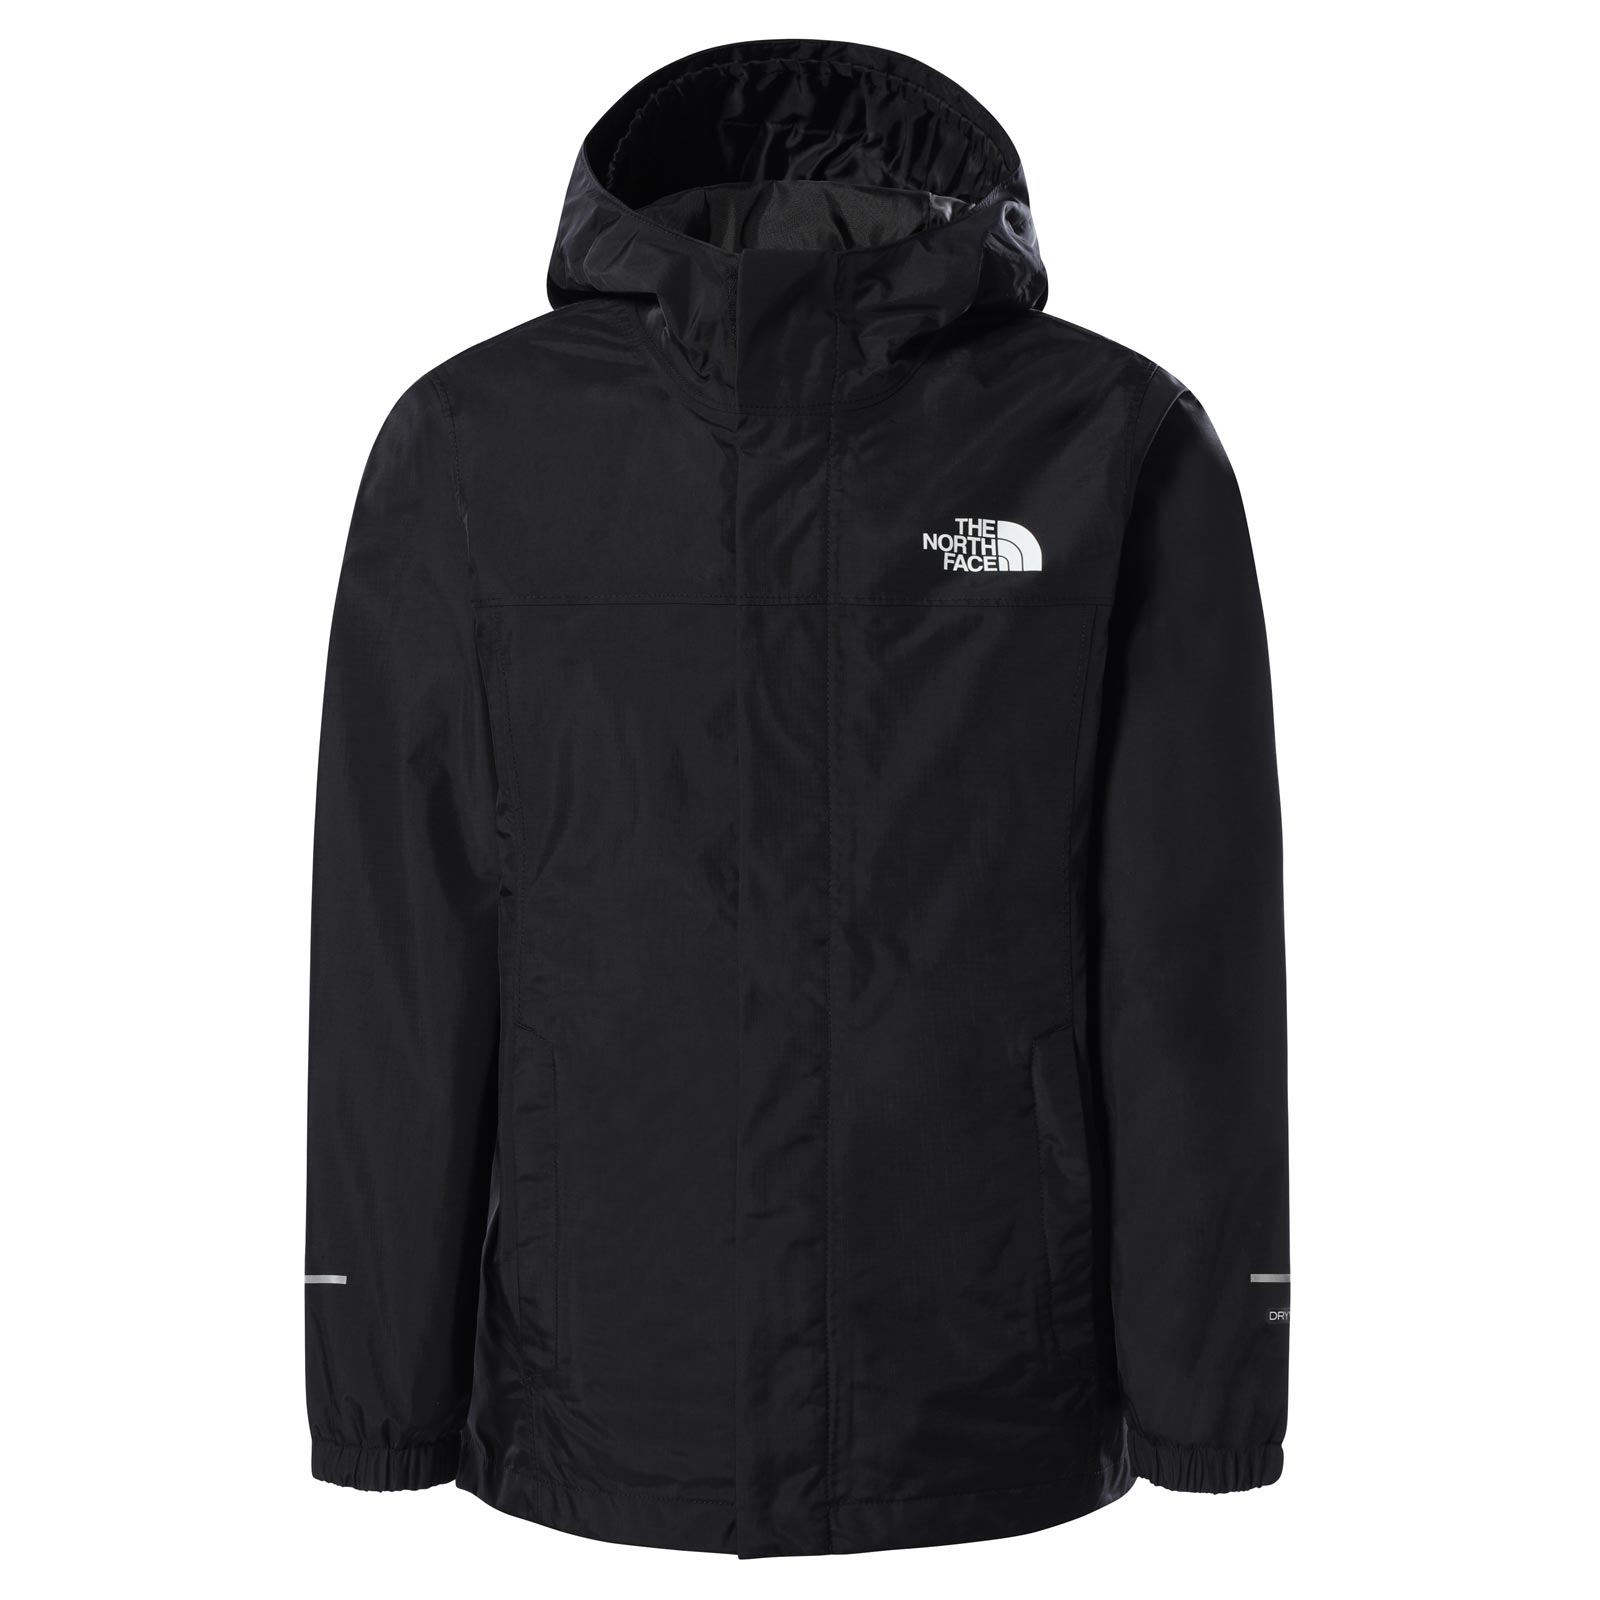 THE NORTH FACE BOYS RESOLVE REFLECTIVE JACKET